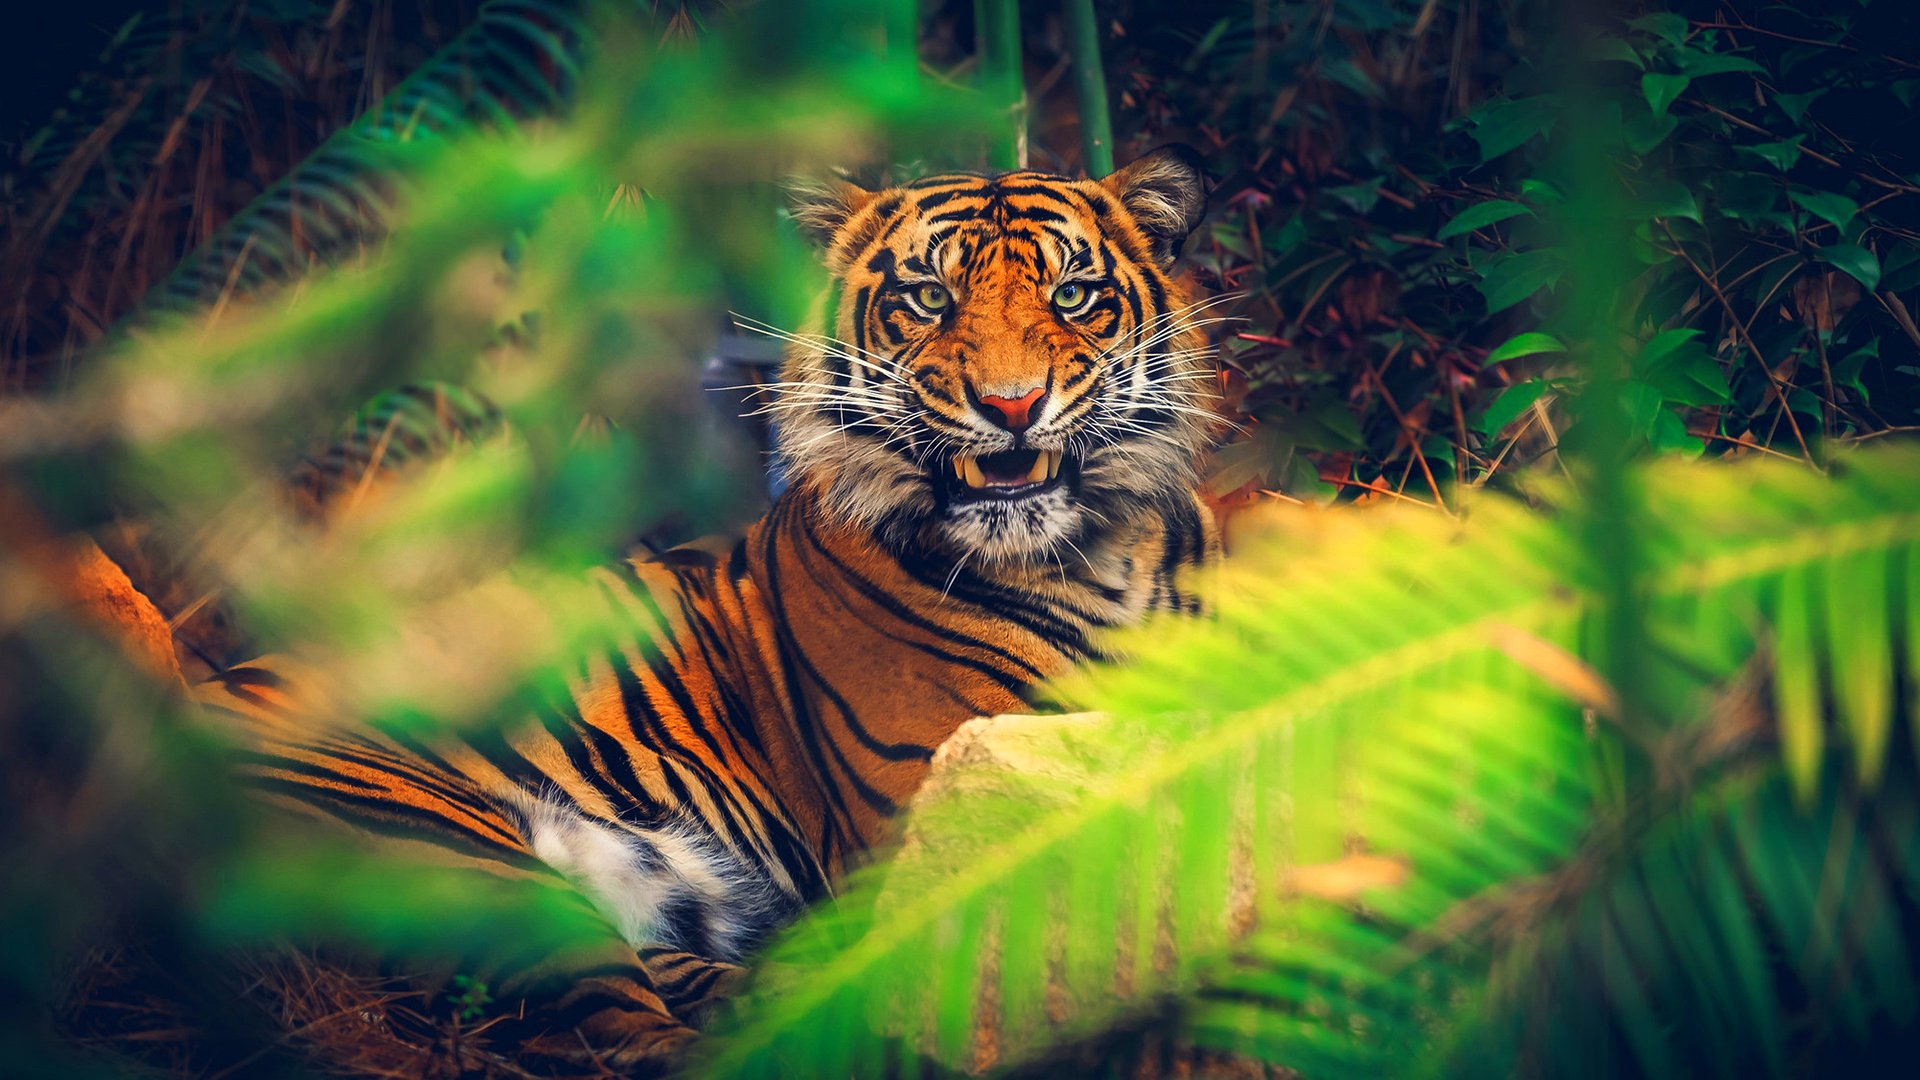 Image: Tiger, stripes, fangs, grin, lies, muzzle, eyes, look, predator, thickets